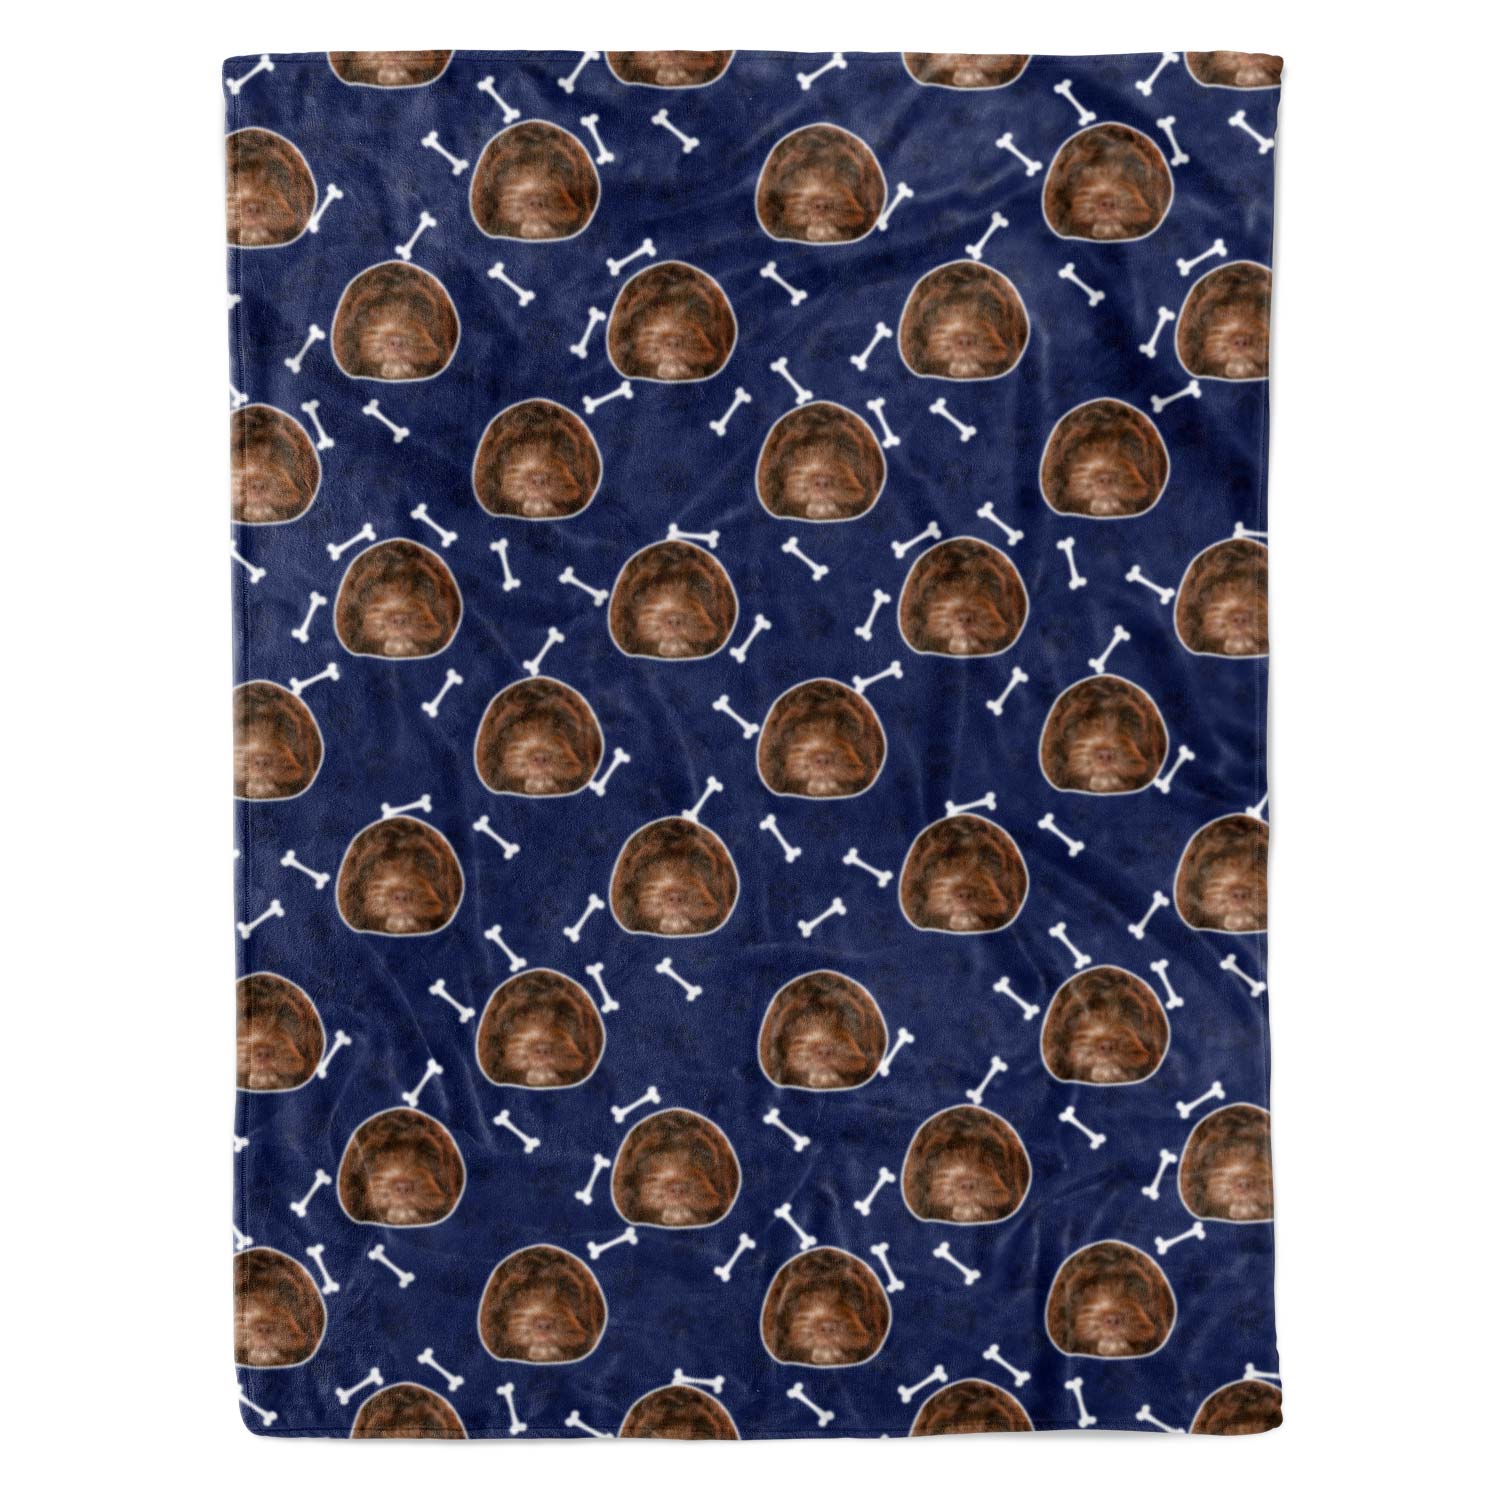 Your Dog Personalised Blanket